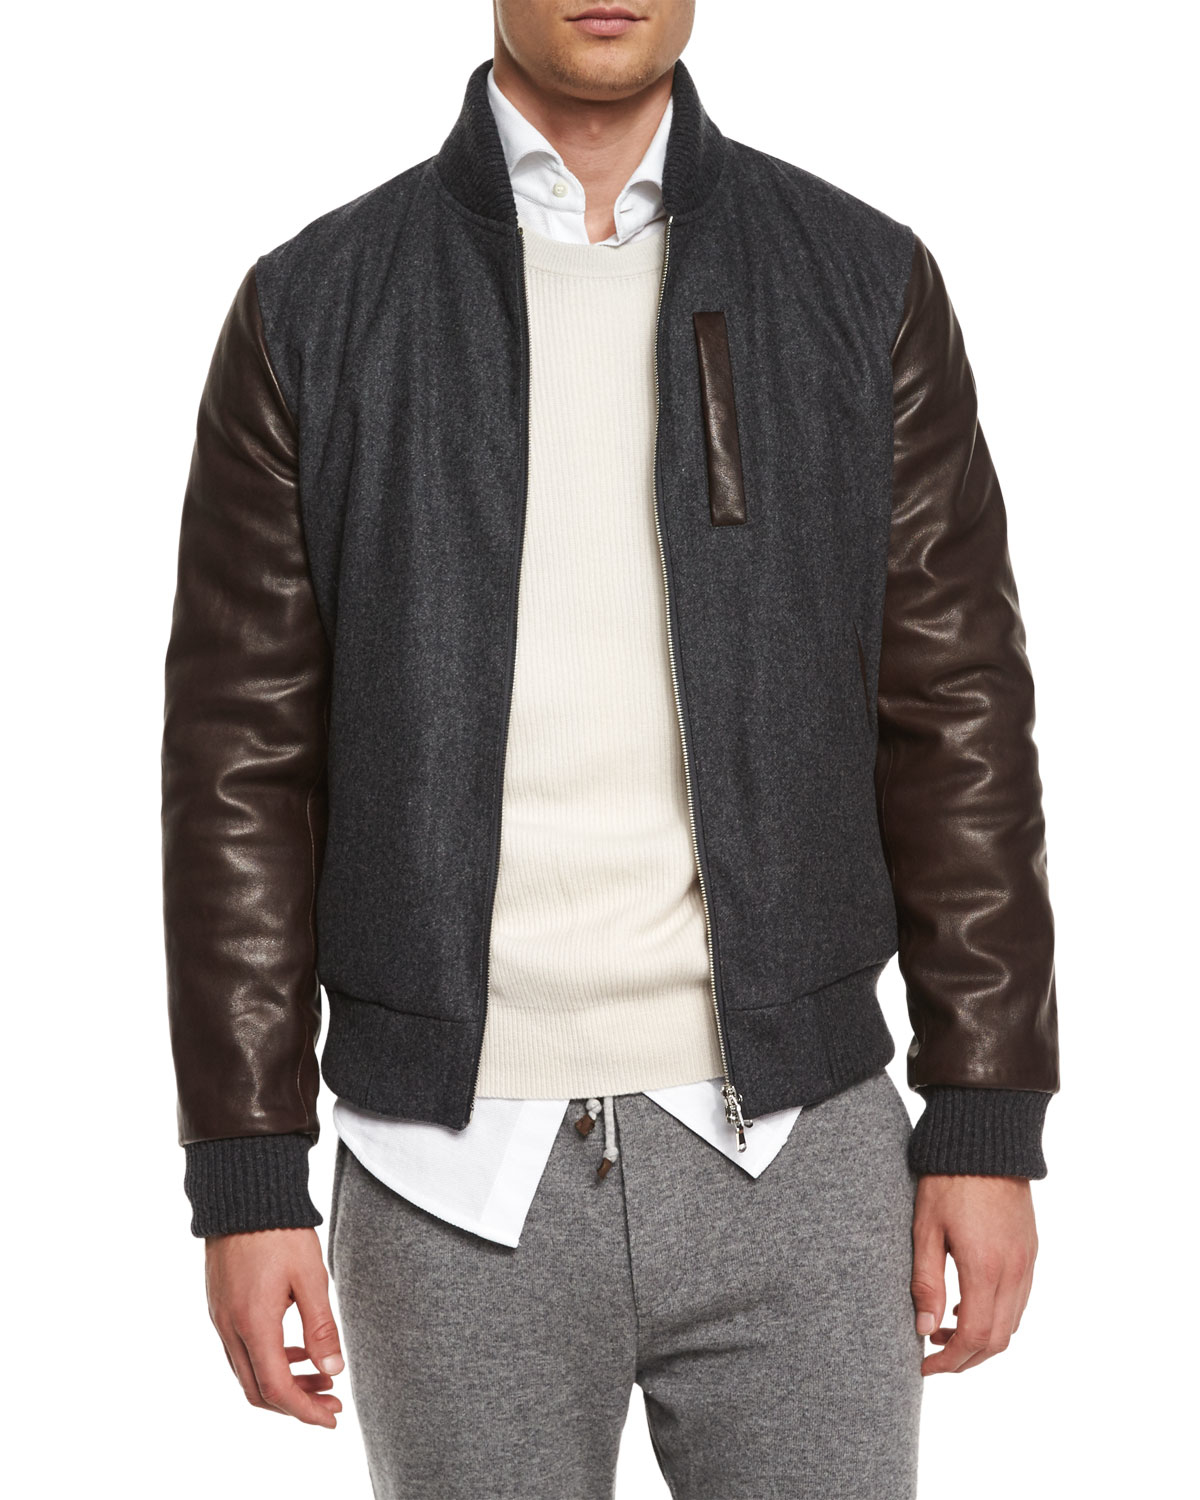 Lyst - Brunello Cucinelli Mixed-media Wool Bomber Jacket in Gray for Men